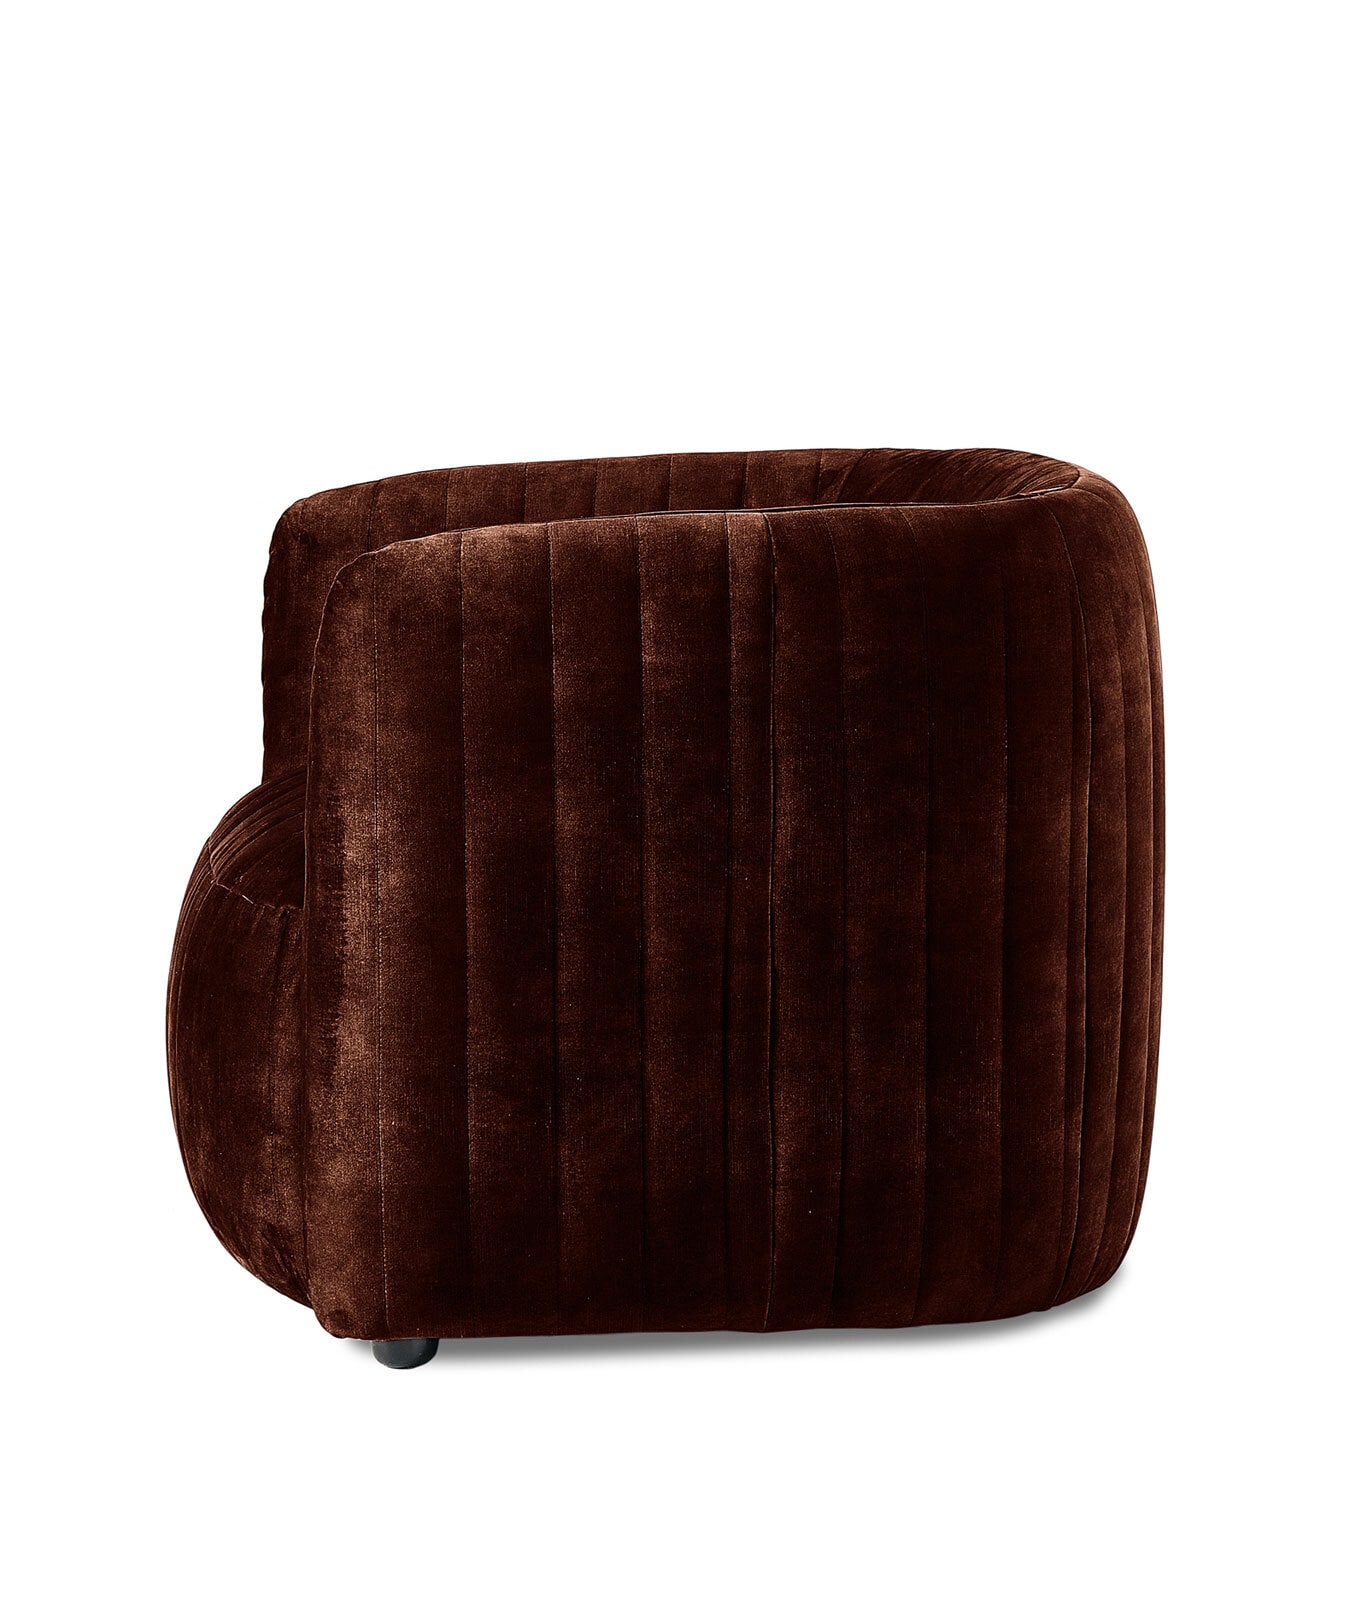 BOHOME Loungesessel WOODS Aquilla tobacco